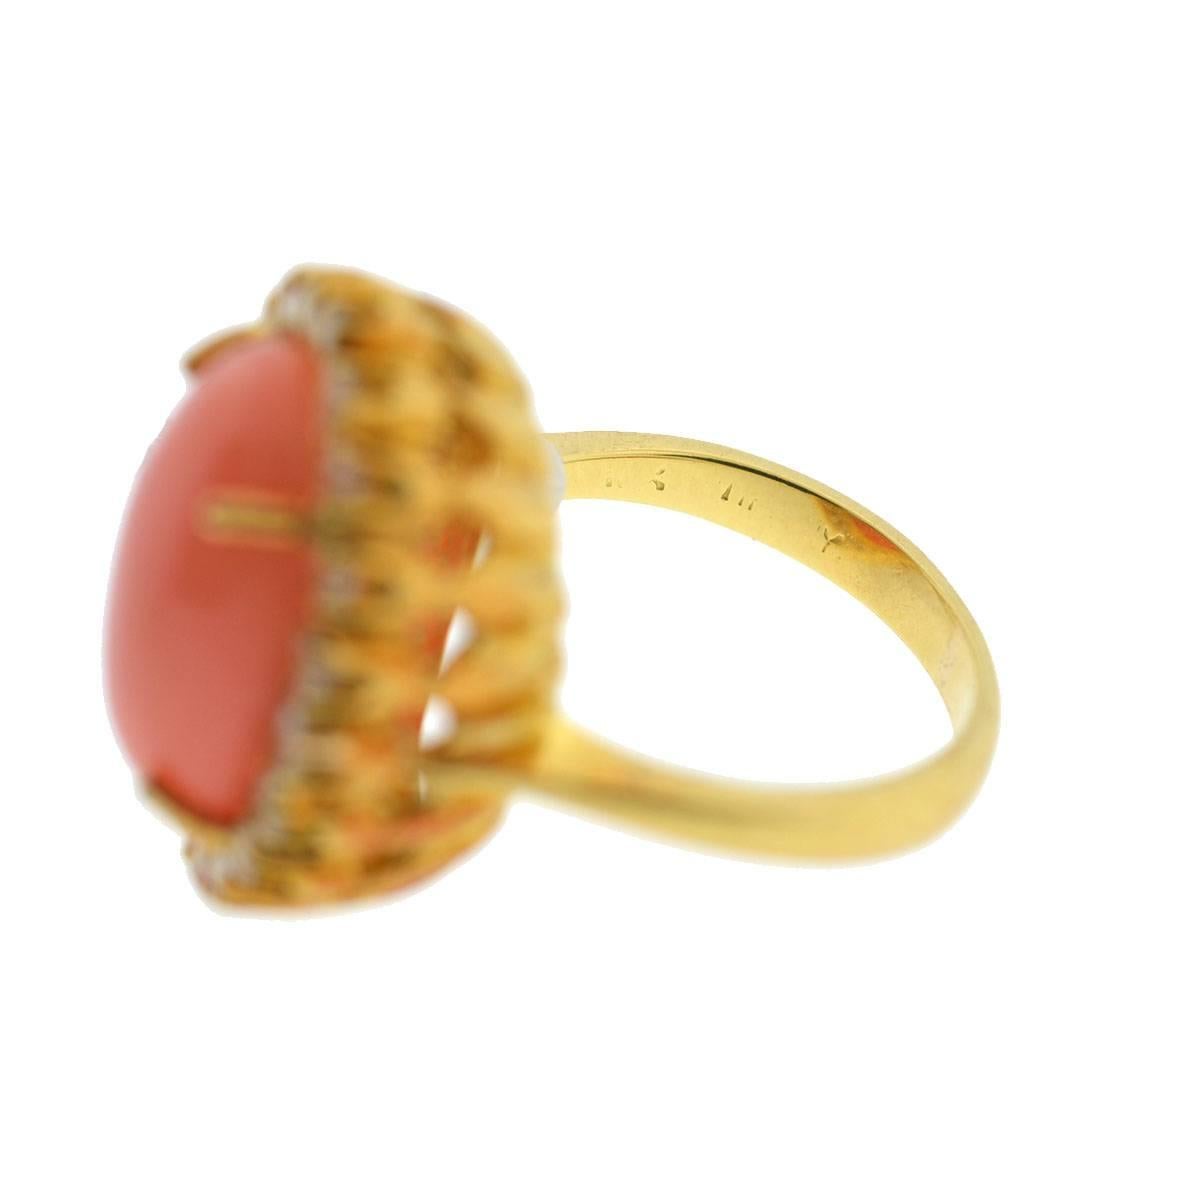 Tiffany & Co. 18 Karat Yellow Gold Oval Coral Stone Ring with Diamonds 1